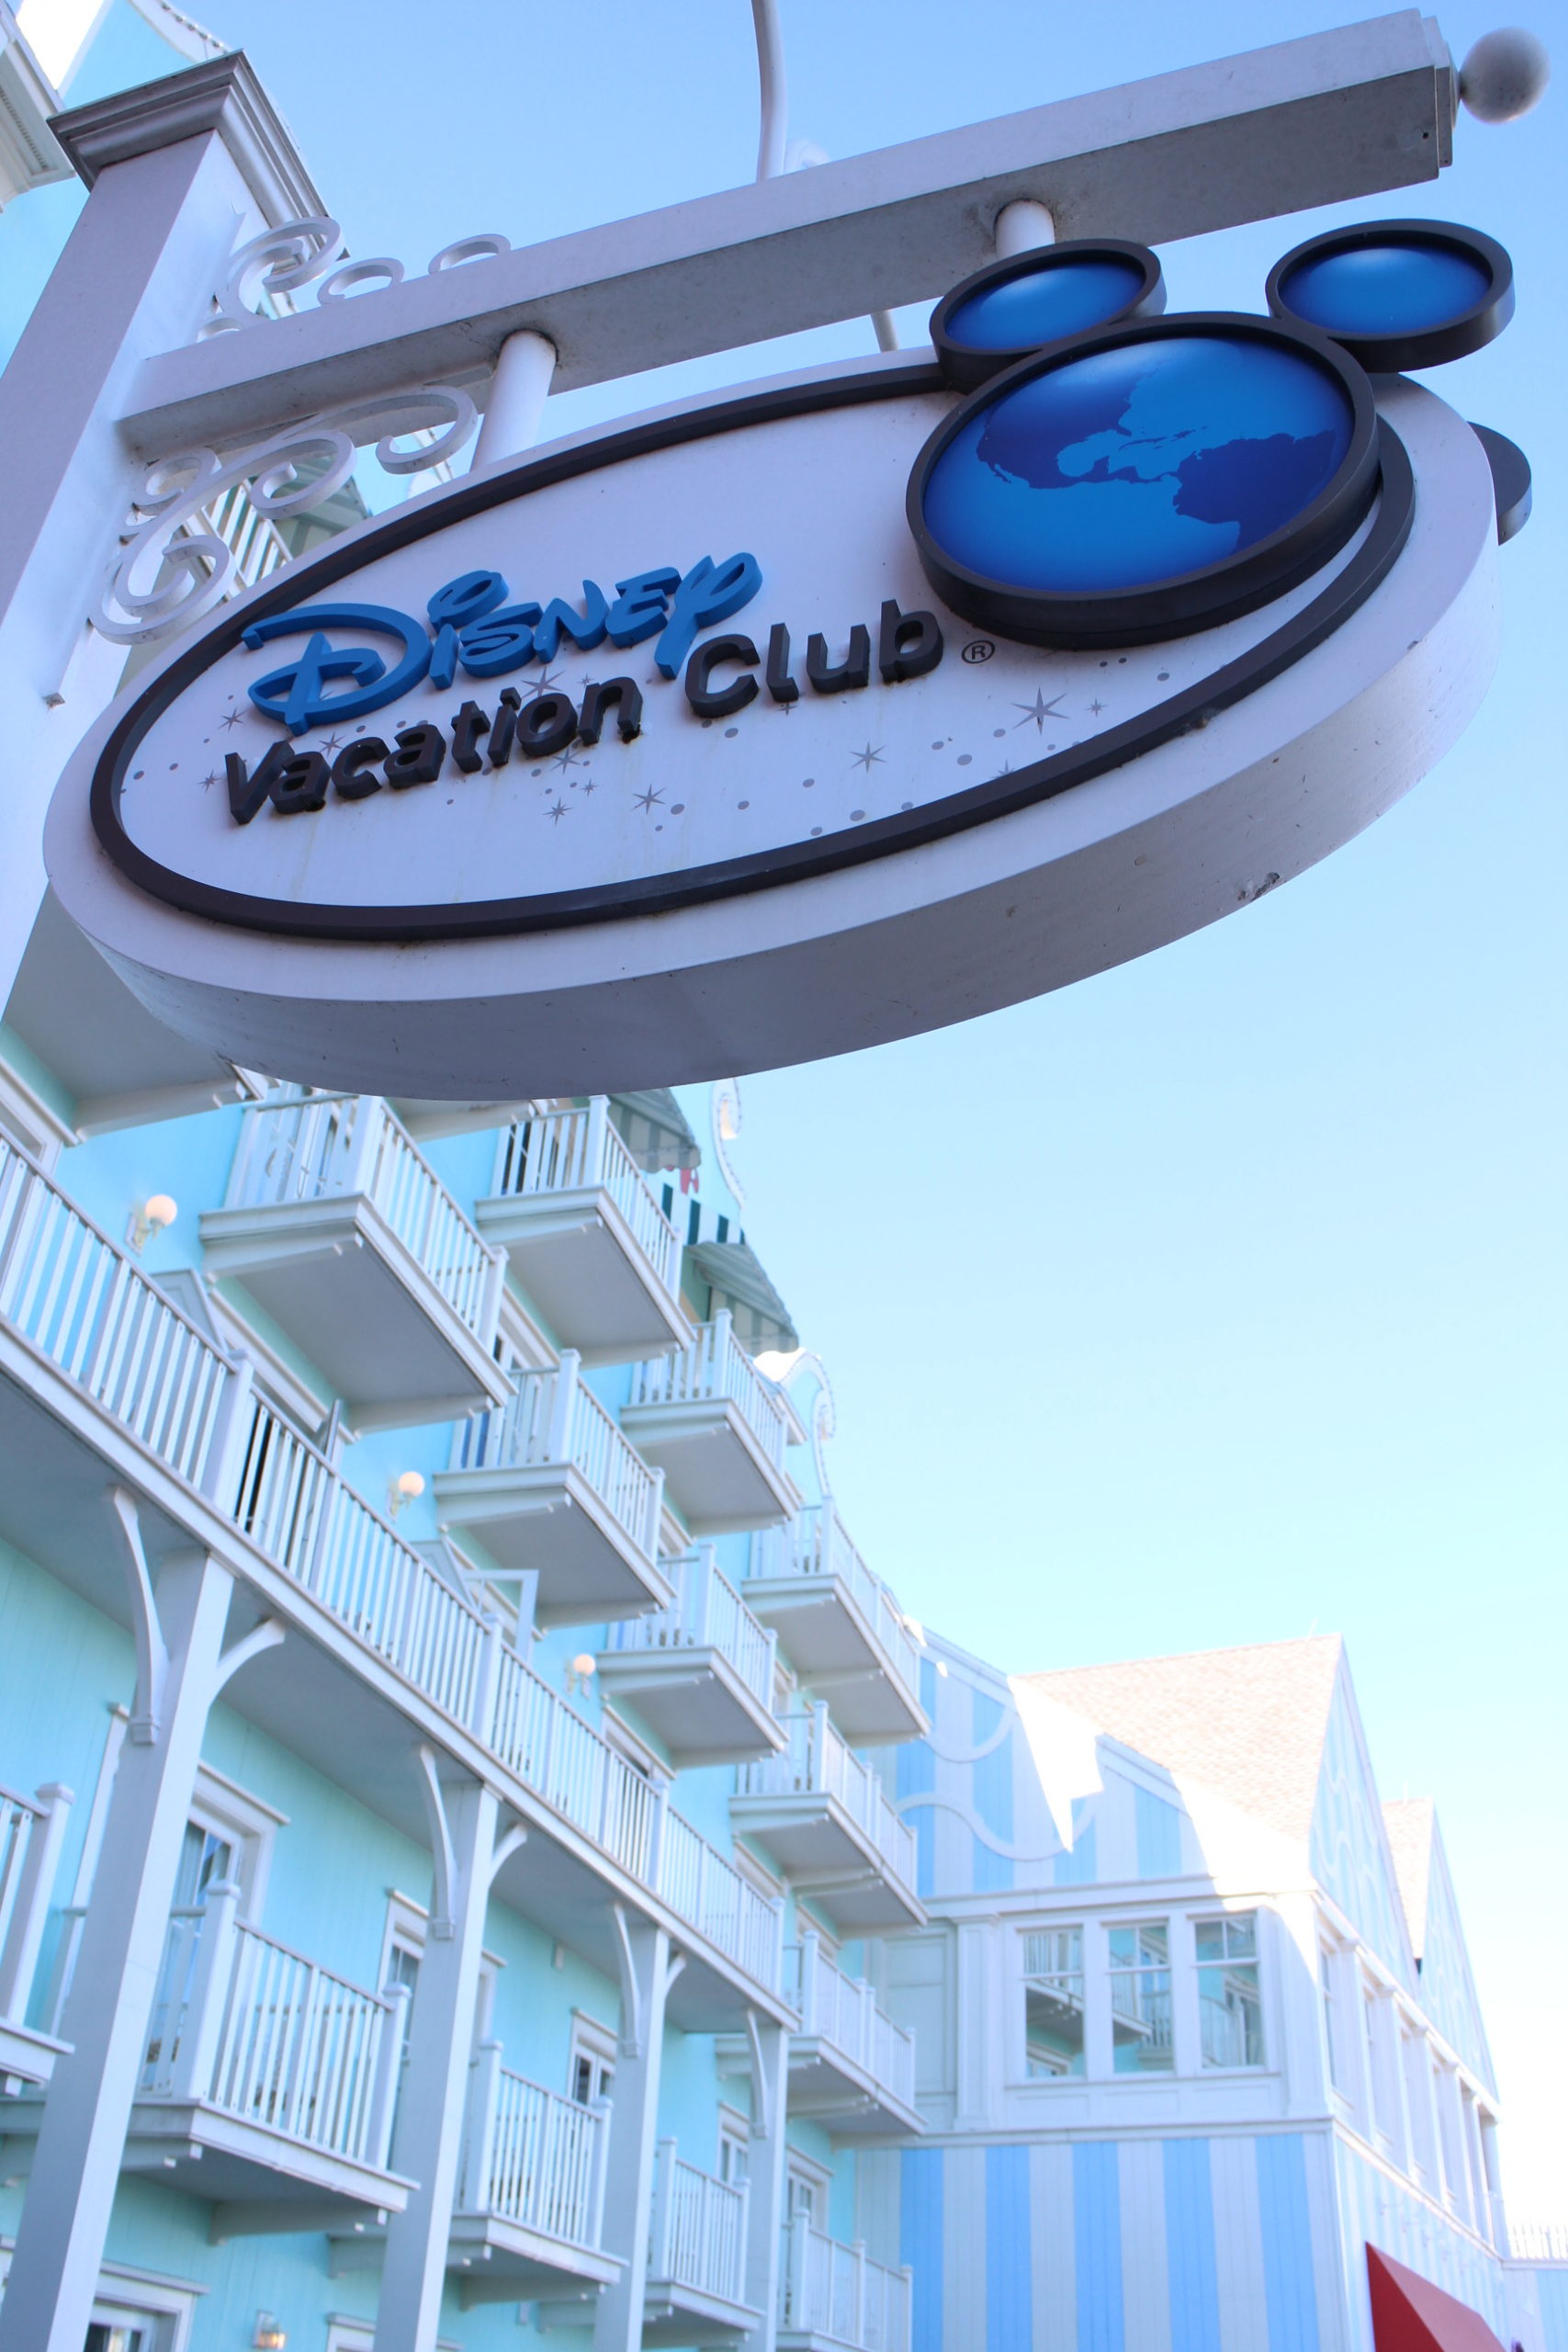 Disney Vacation Club sign with logo hangs in front of bright mint hotel building with balconies